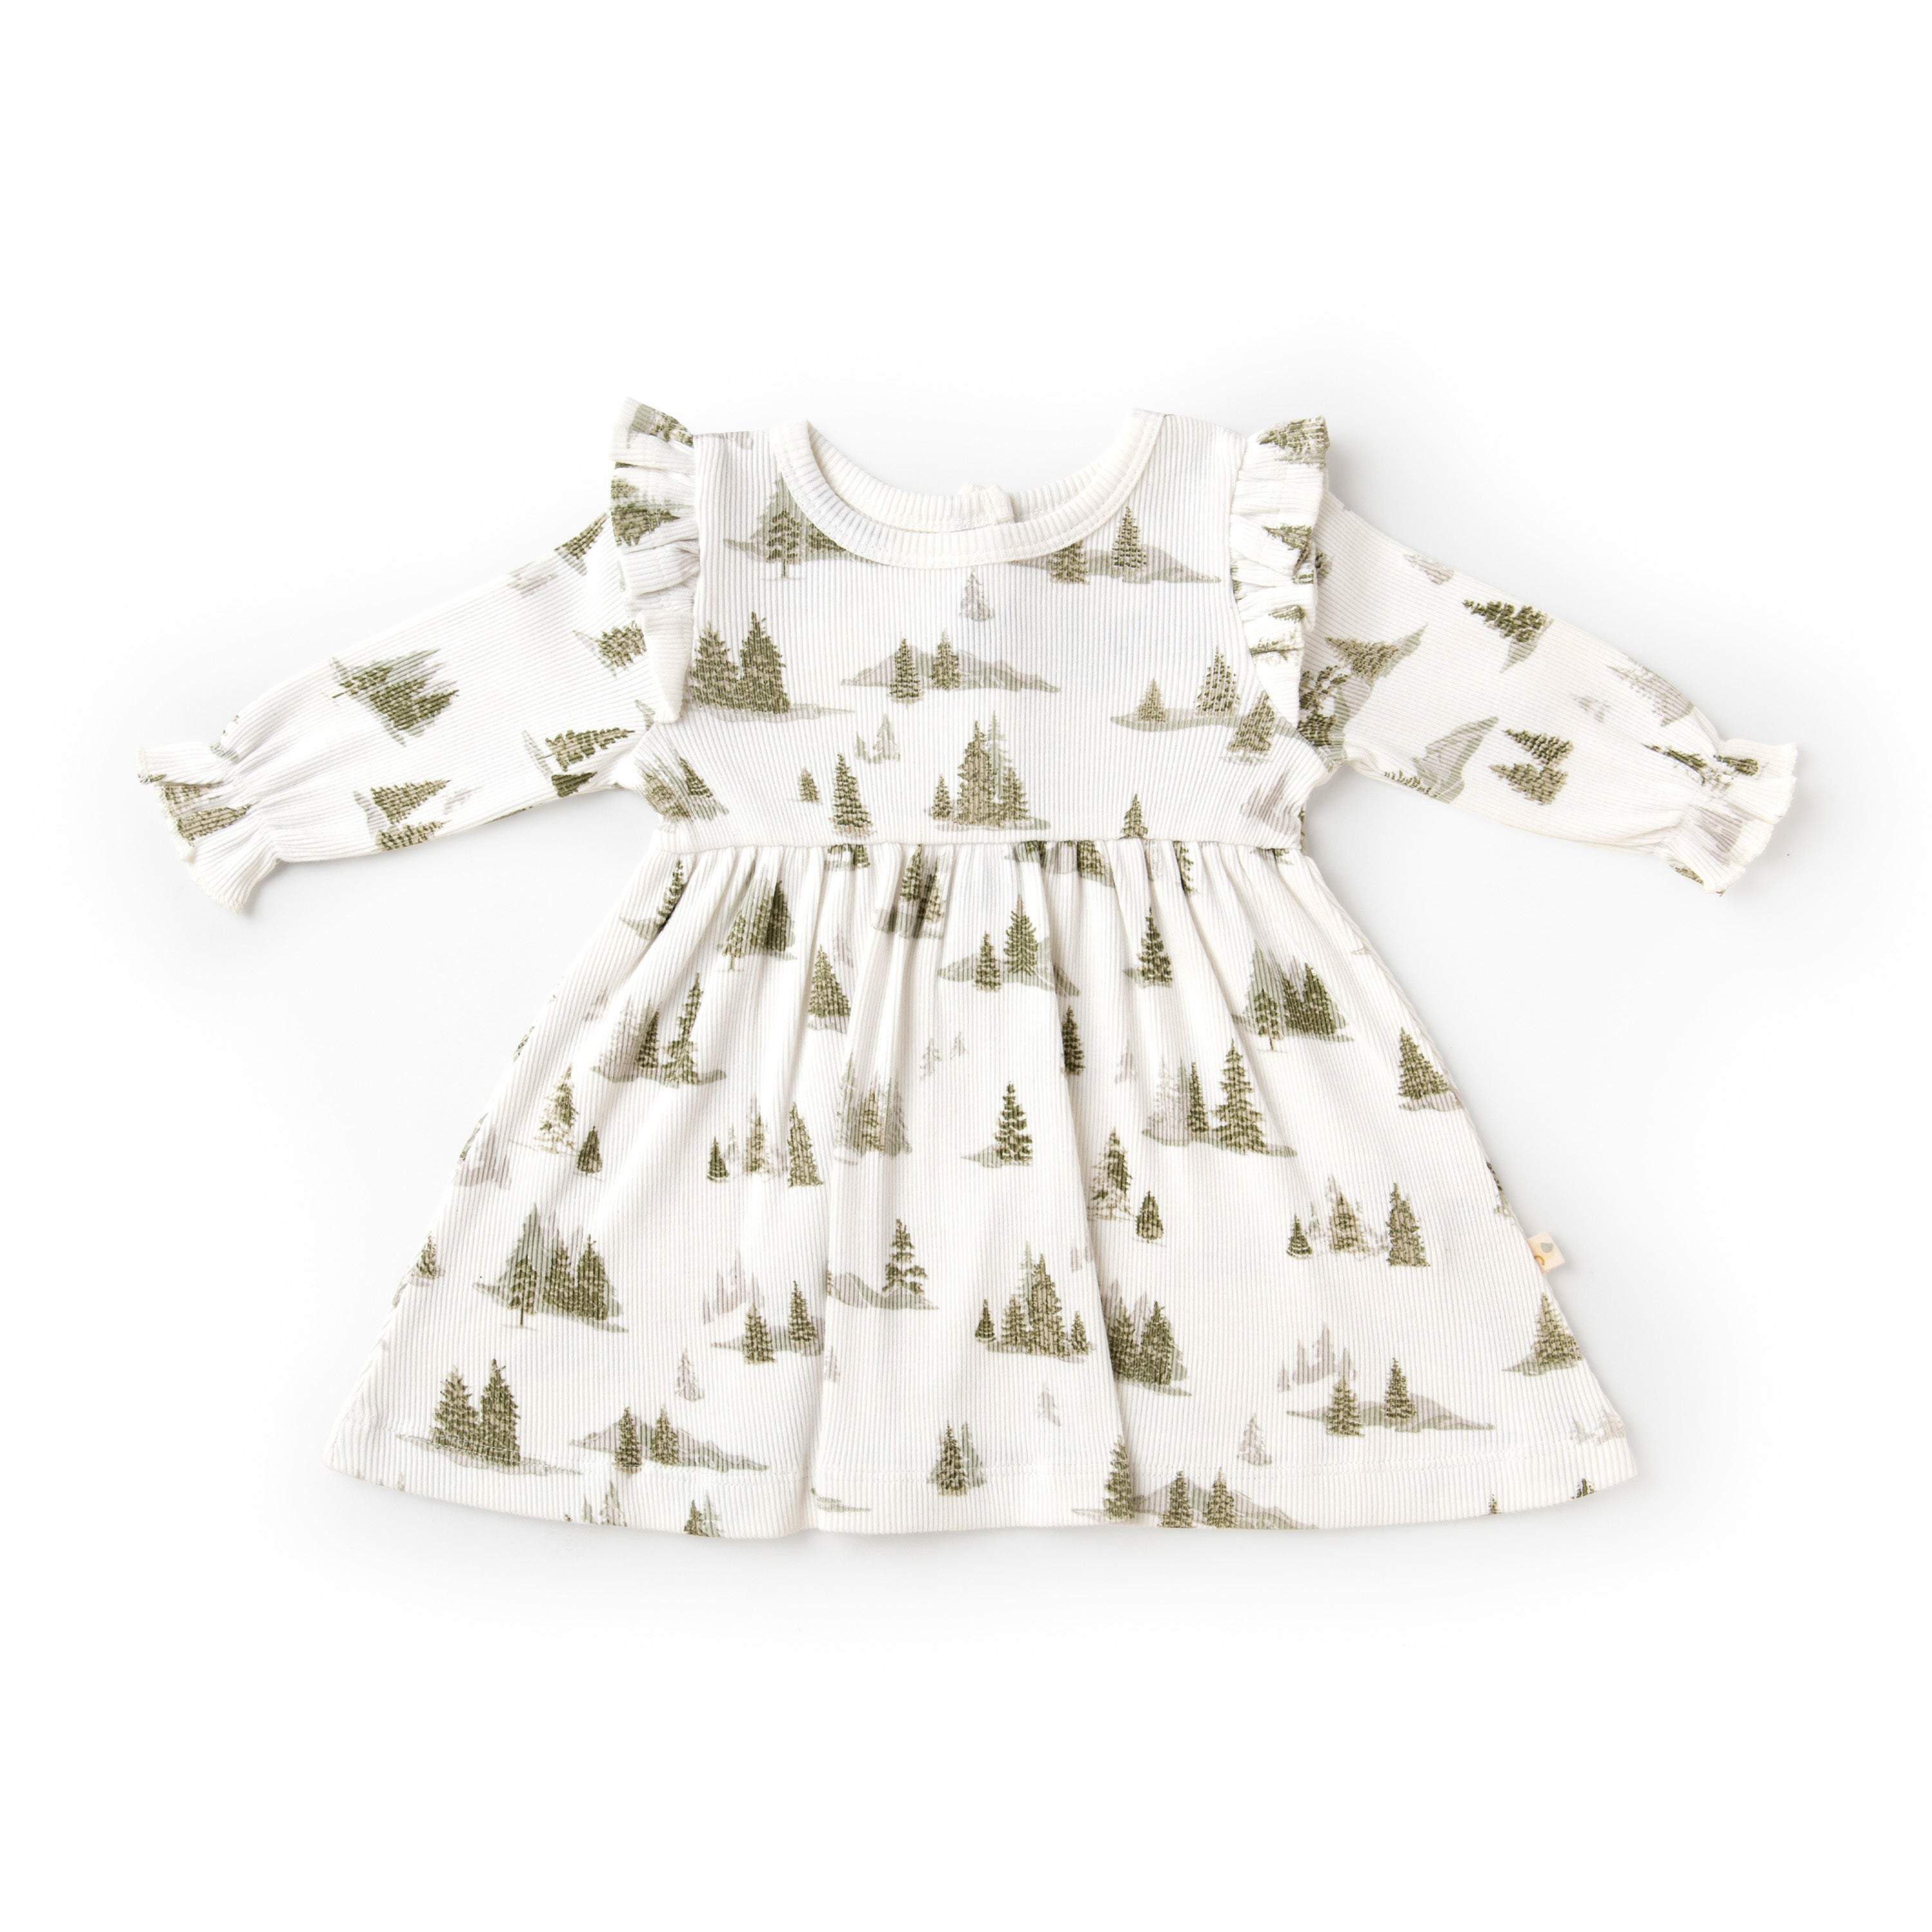 A white baby dress from Organic Girls with a woodland theme, featuring a pattern of green pine trees, long sleeves, and ruffled shoulders, displayed on a plain background.